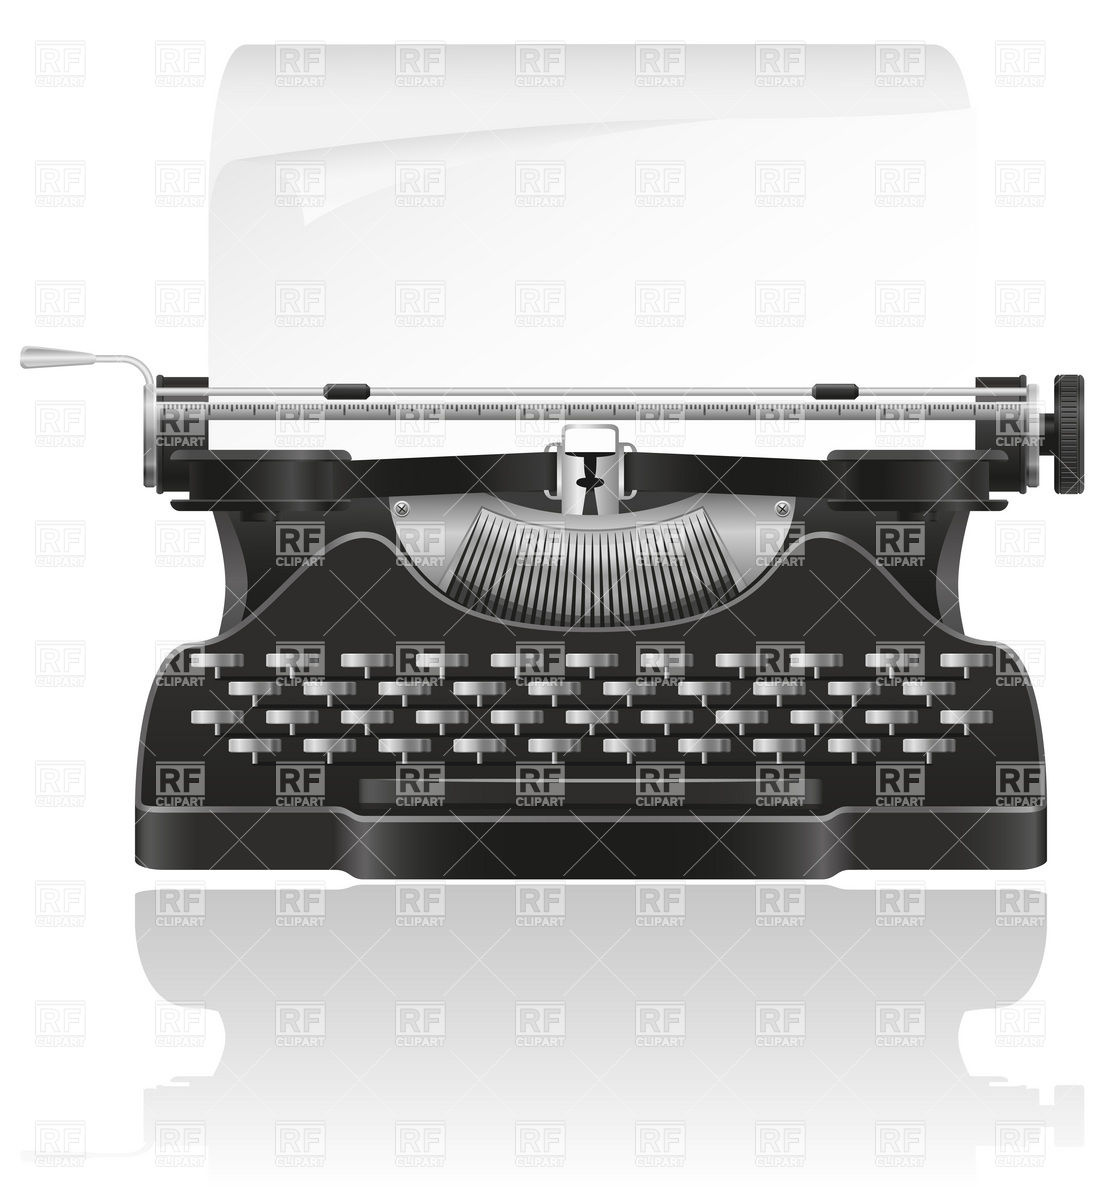 Old Typewriter 19630 Objects Download Royalty Free Vector Clip Art